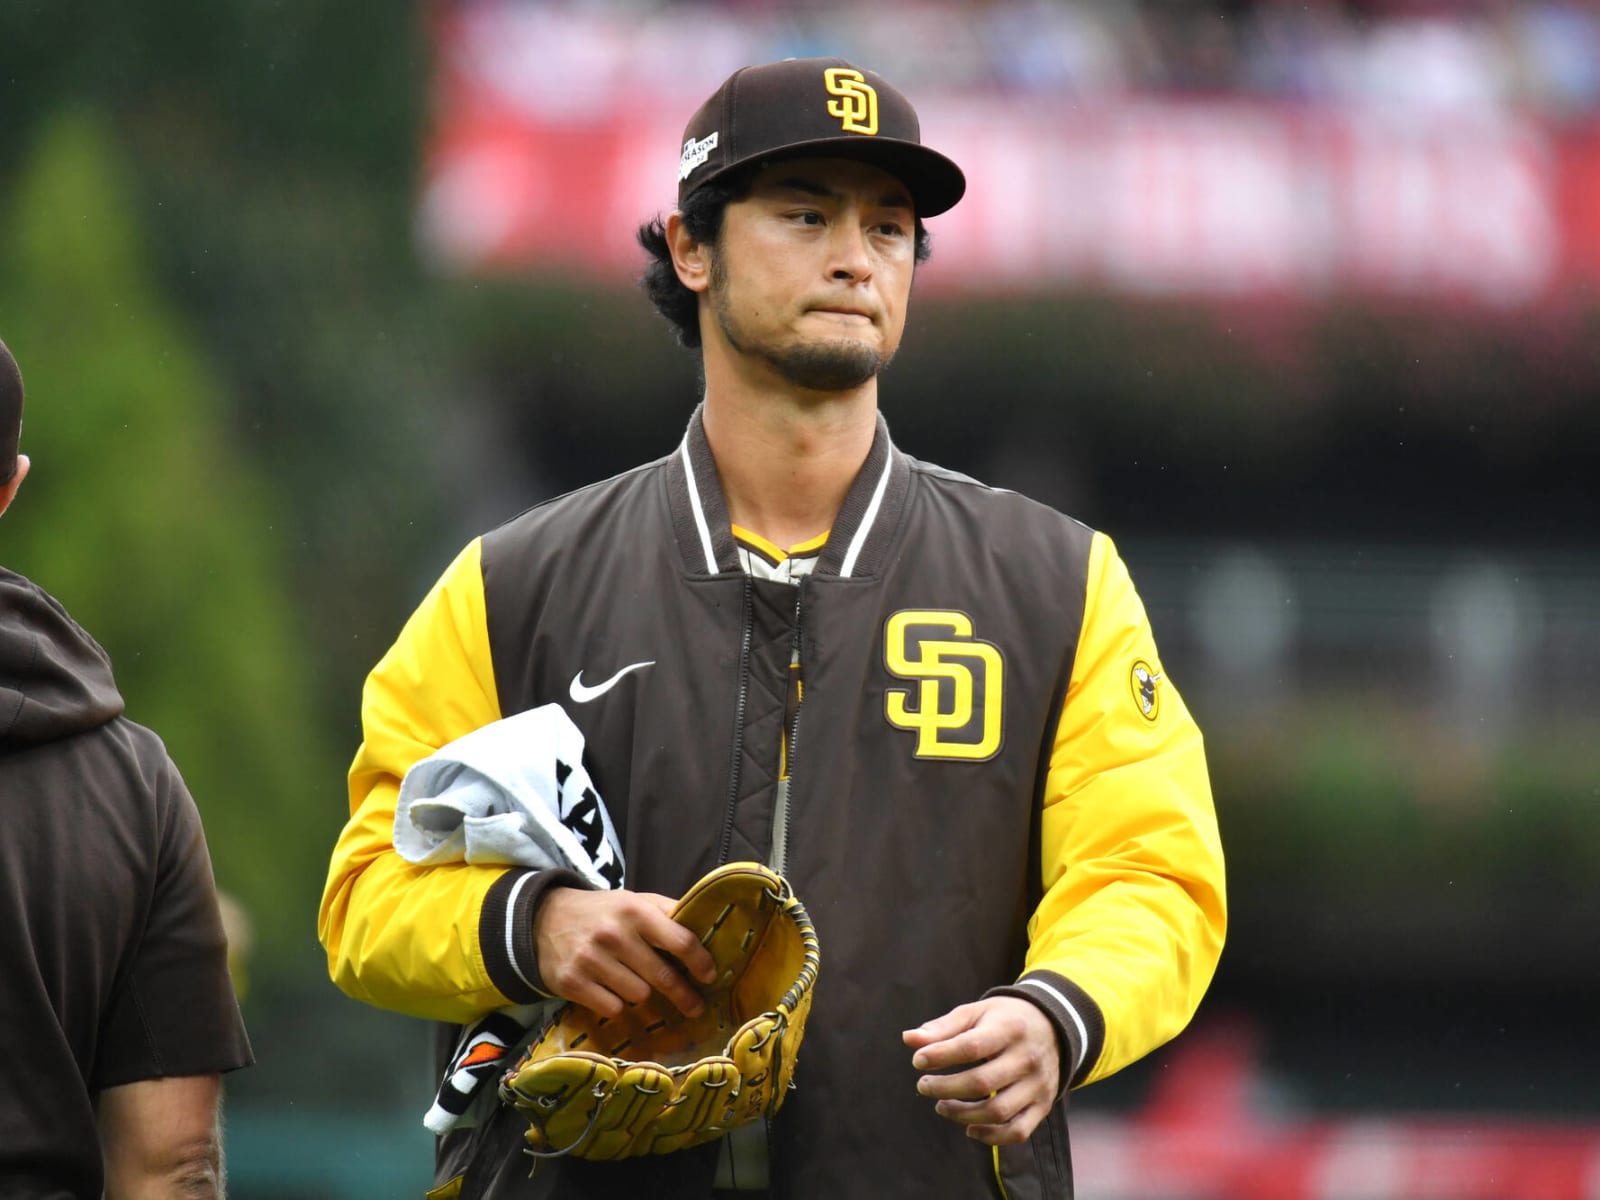 Padres give Yu Darvish a security blanket, but other issues remain unsolved